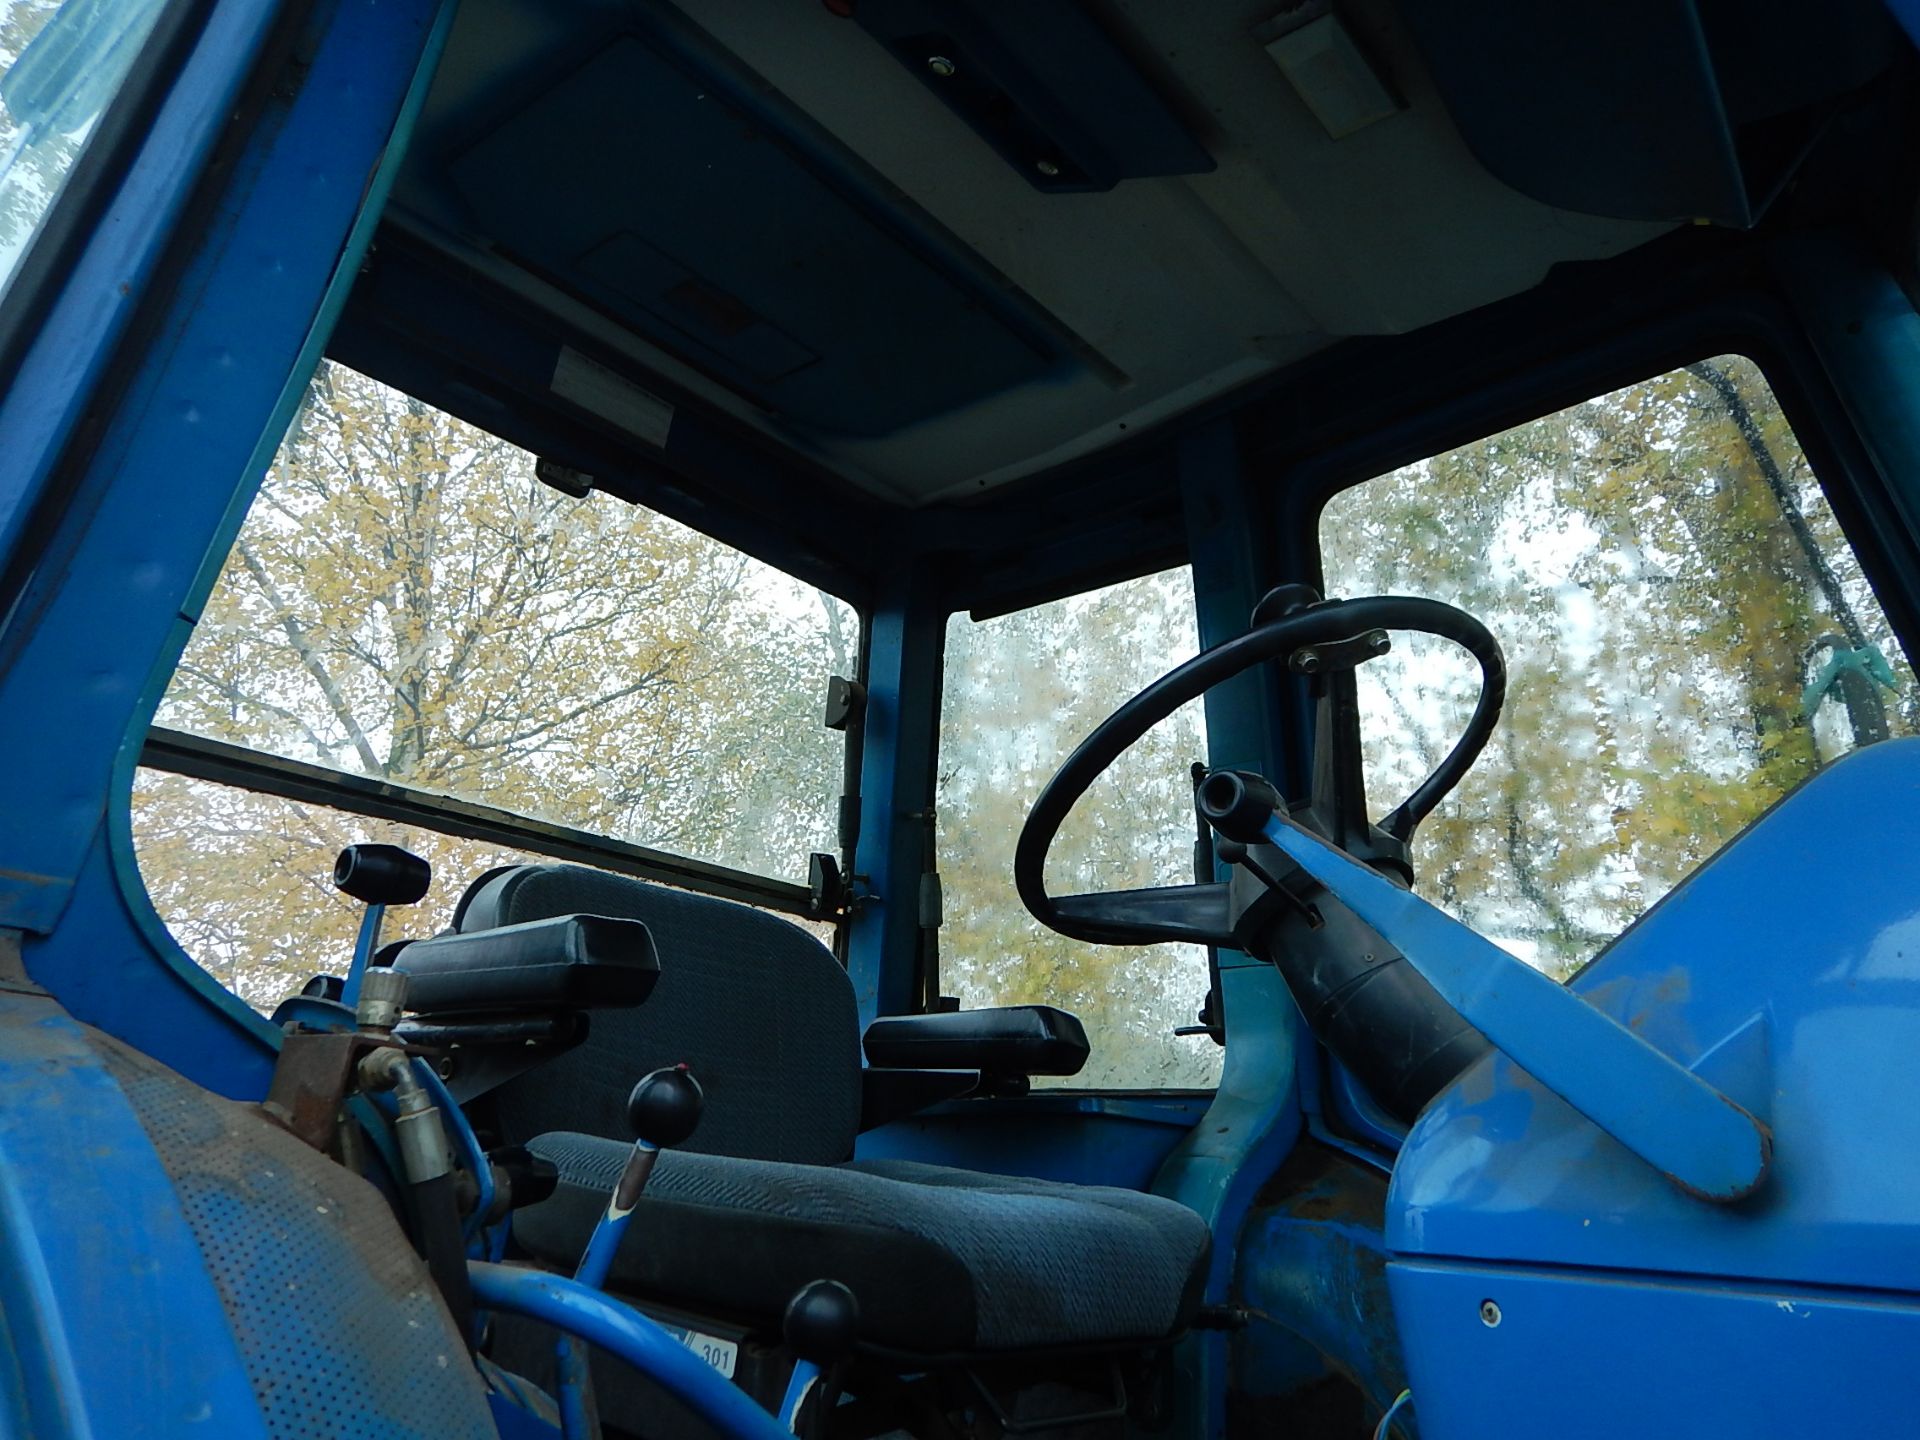 1985 FORD TW-25 4wd TRACTOR Fitted with front underslung weight, rear inside wheel weights, Q cab - Image 6 of 12